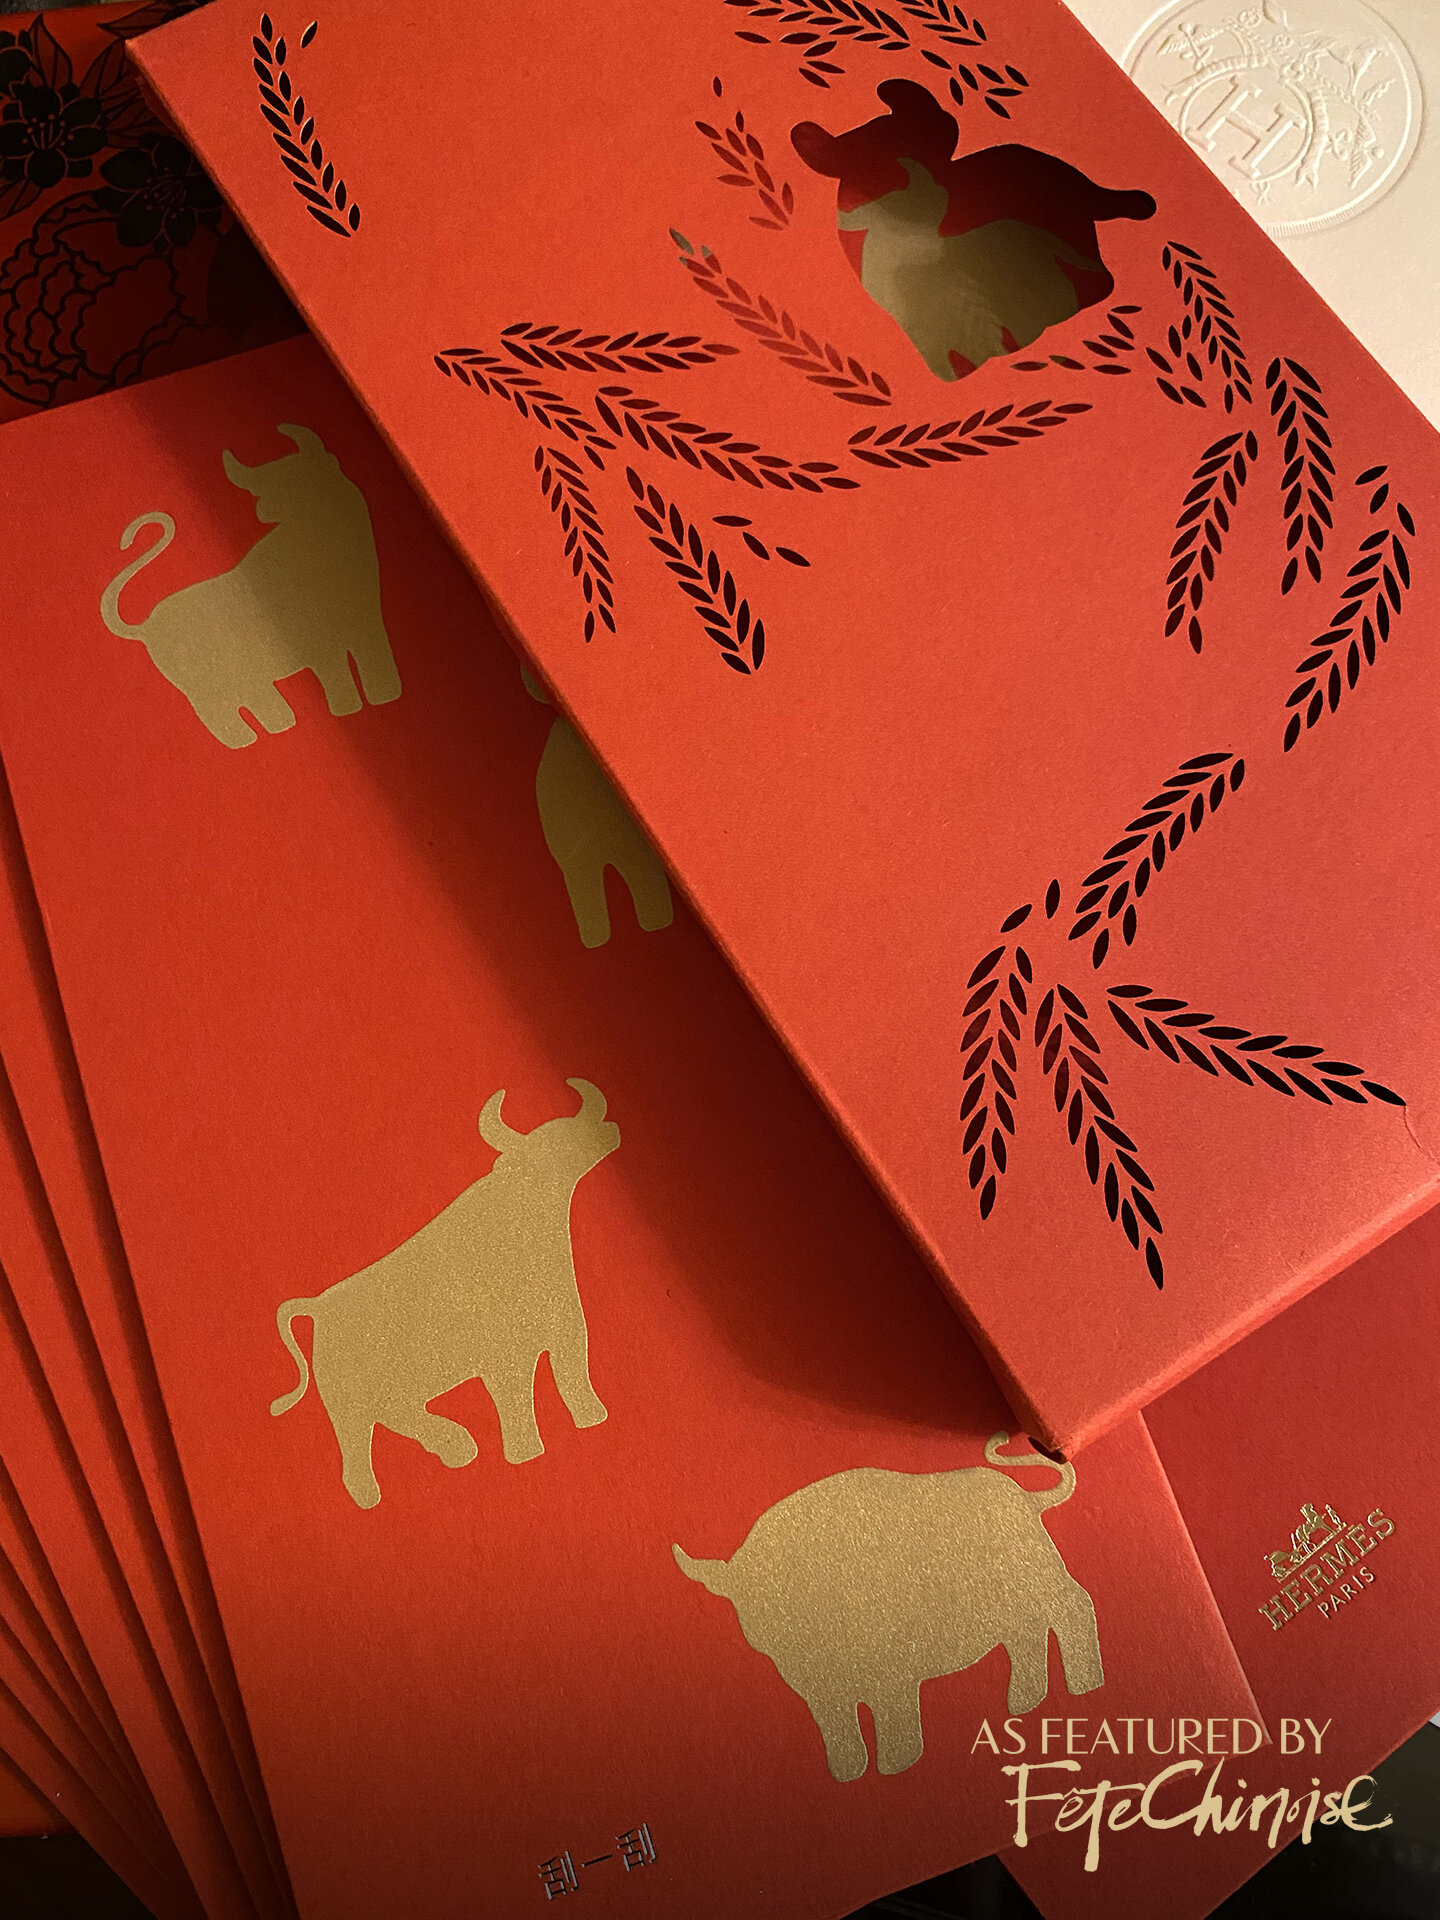 What's the significance of Lunar New Year red envelopes?